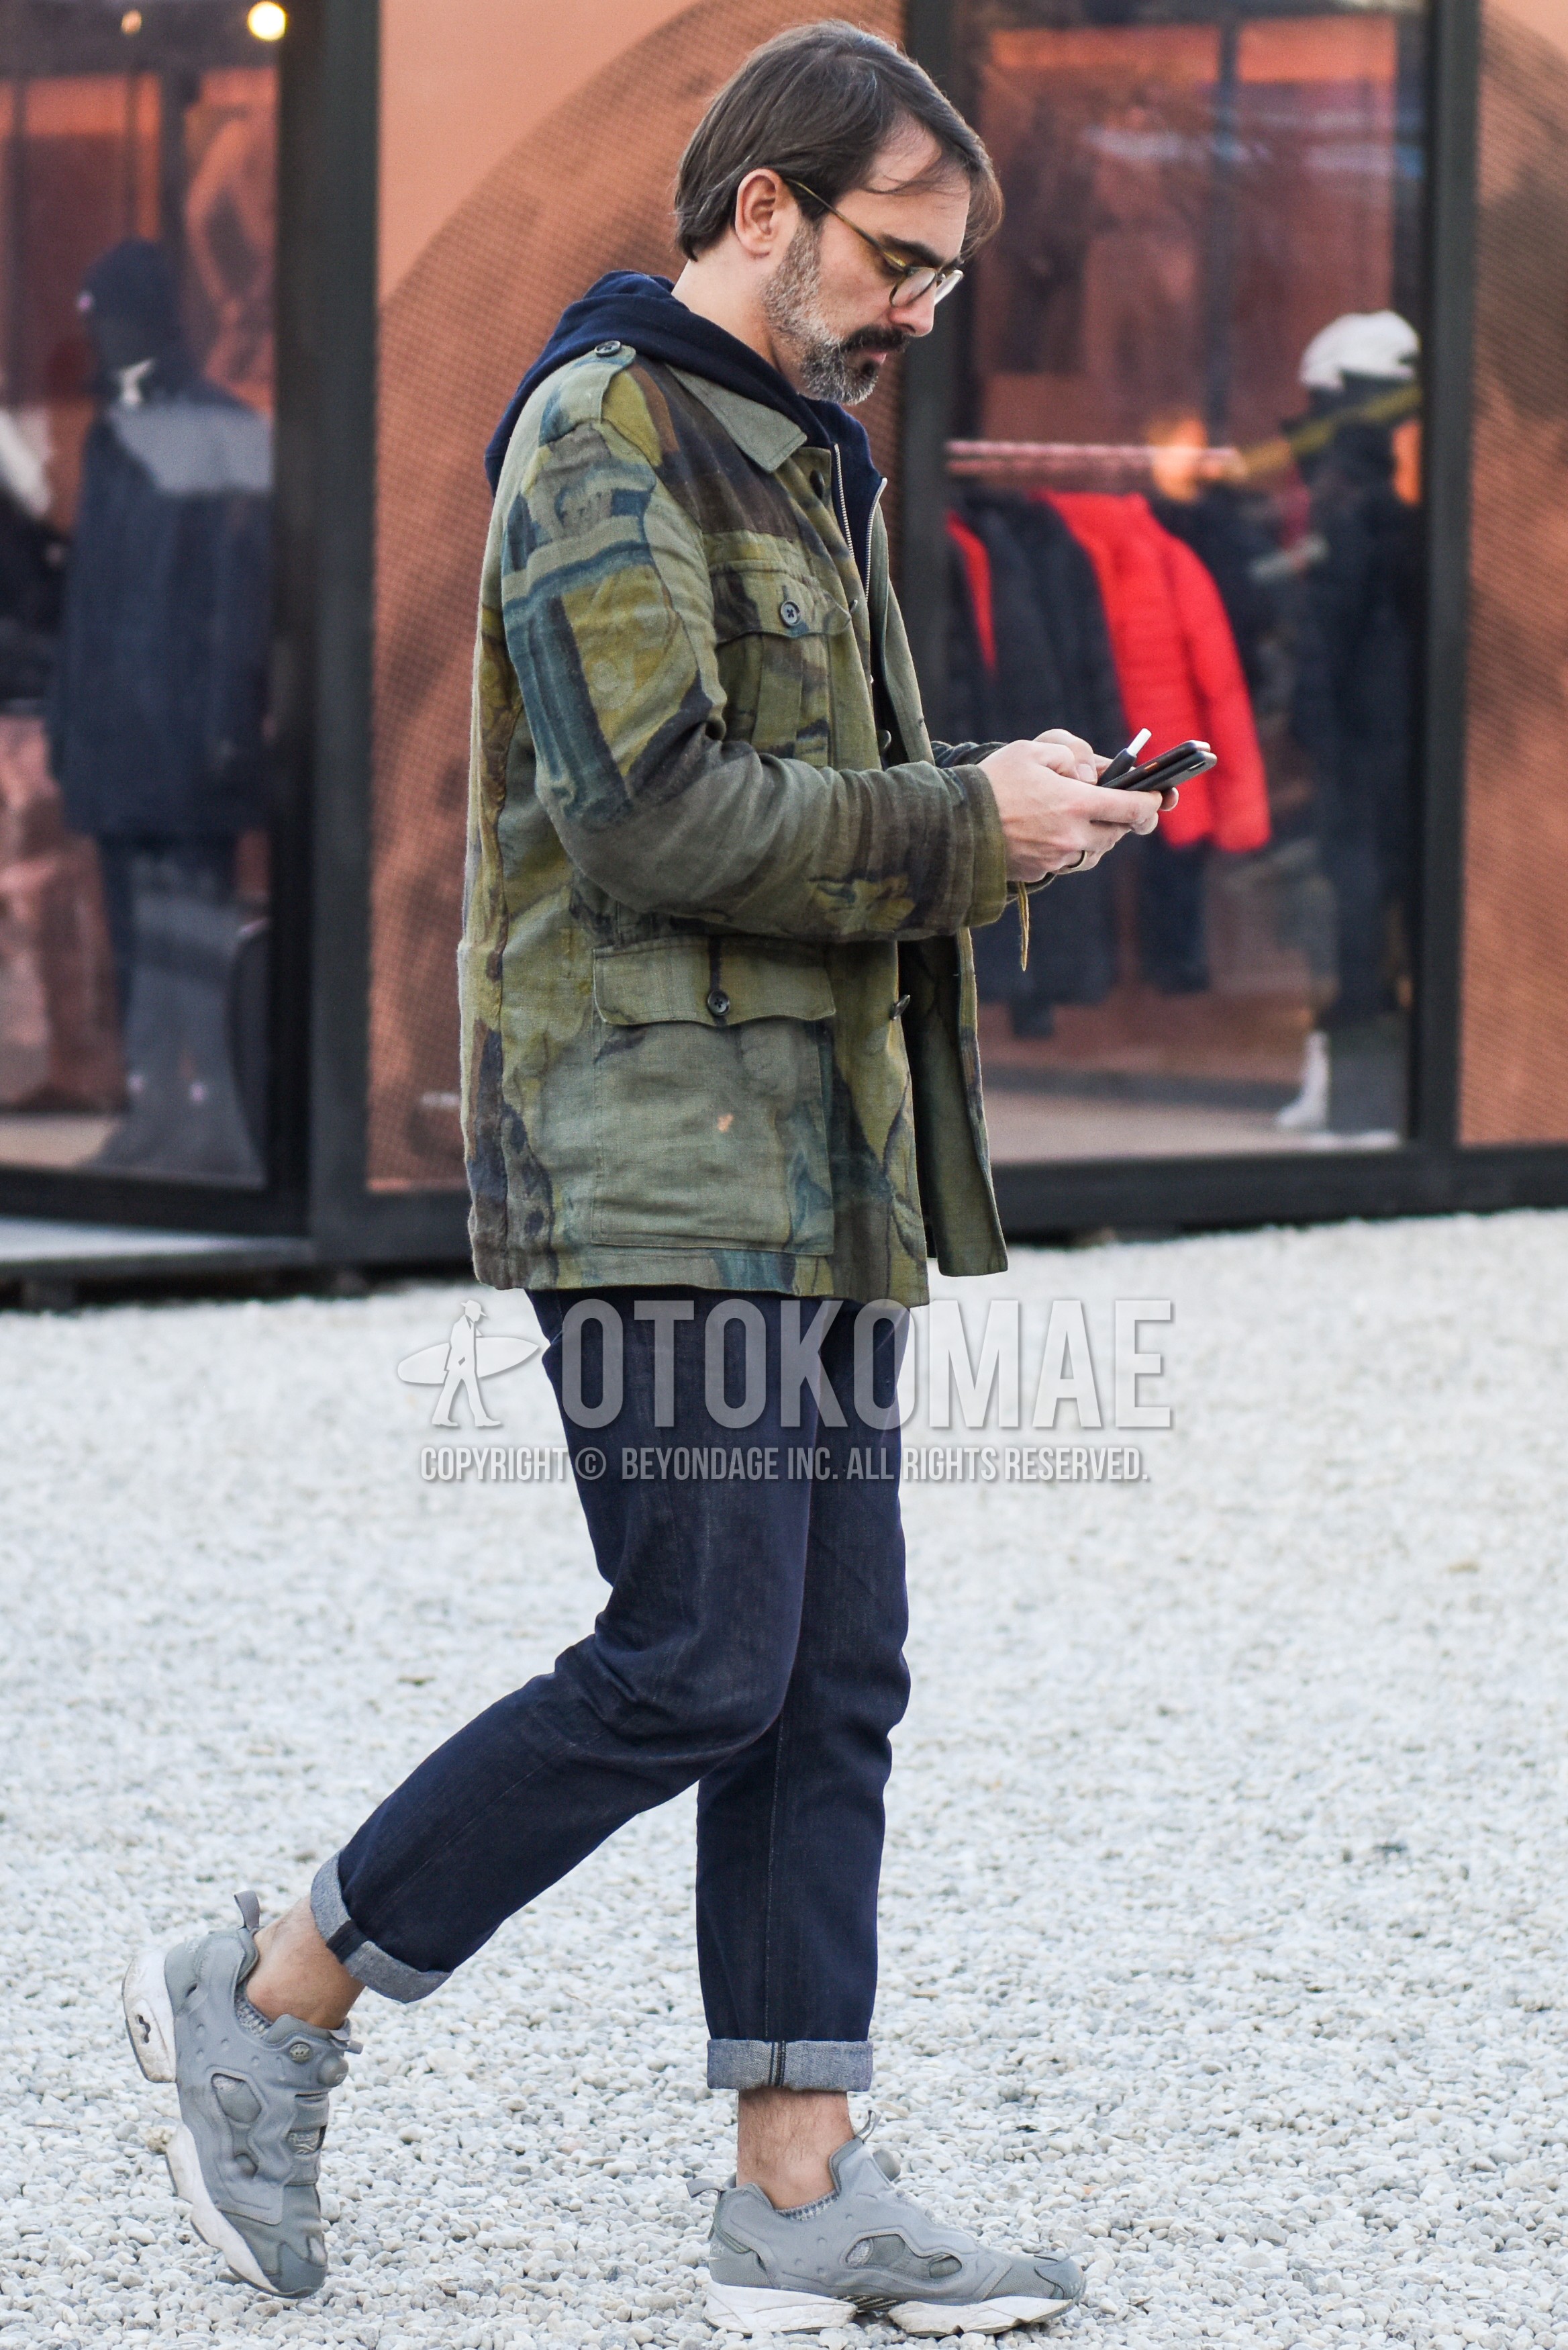 Men's autumn winter outfit with brown tortoiseshell glasses, olive green outerwear shirt jacket, navy plain hoodie, navy plain denim/jeans, gray low-cut sneakers.